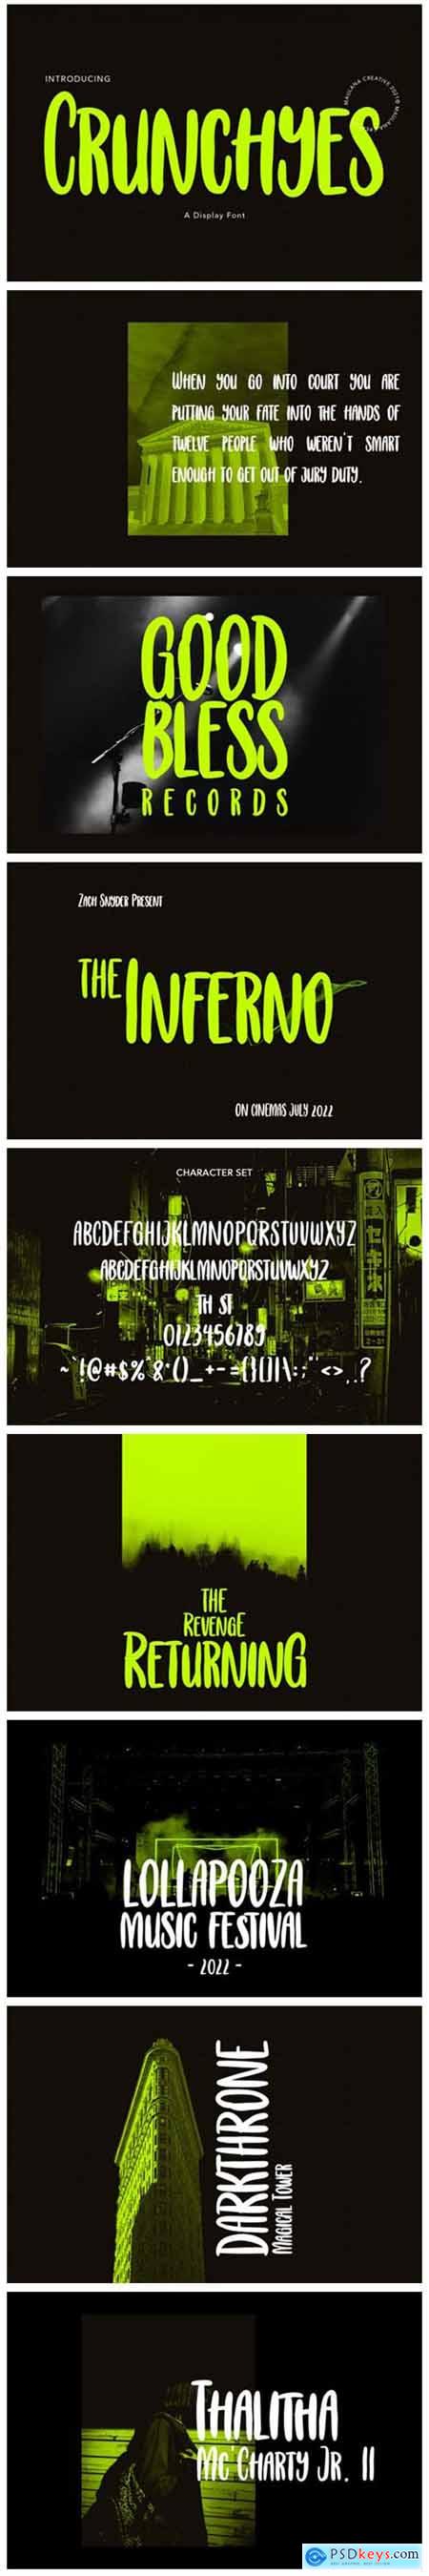 Font » page 18 » Free Download Photoshop Vector Stock image Via Torrent ...